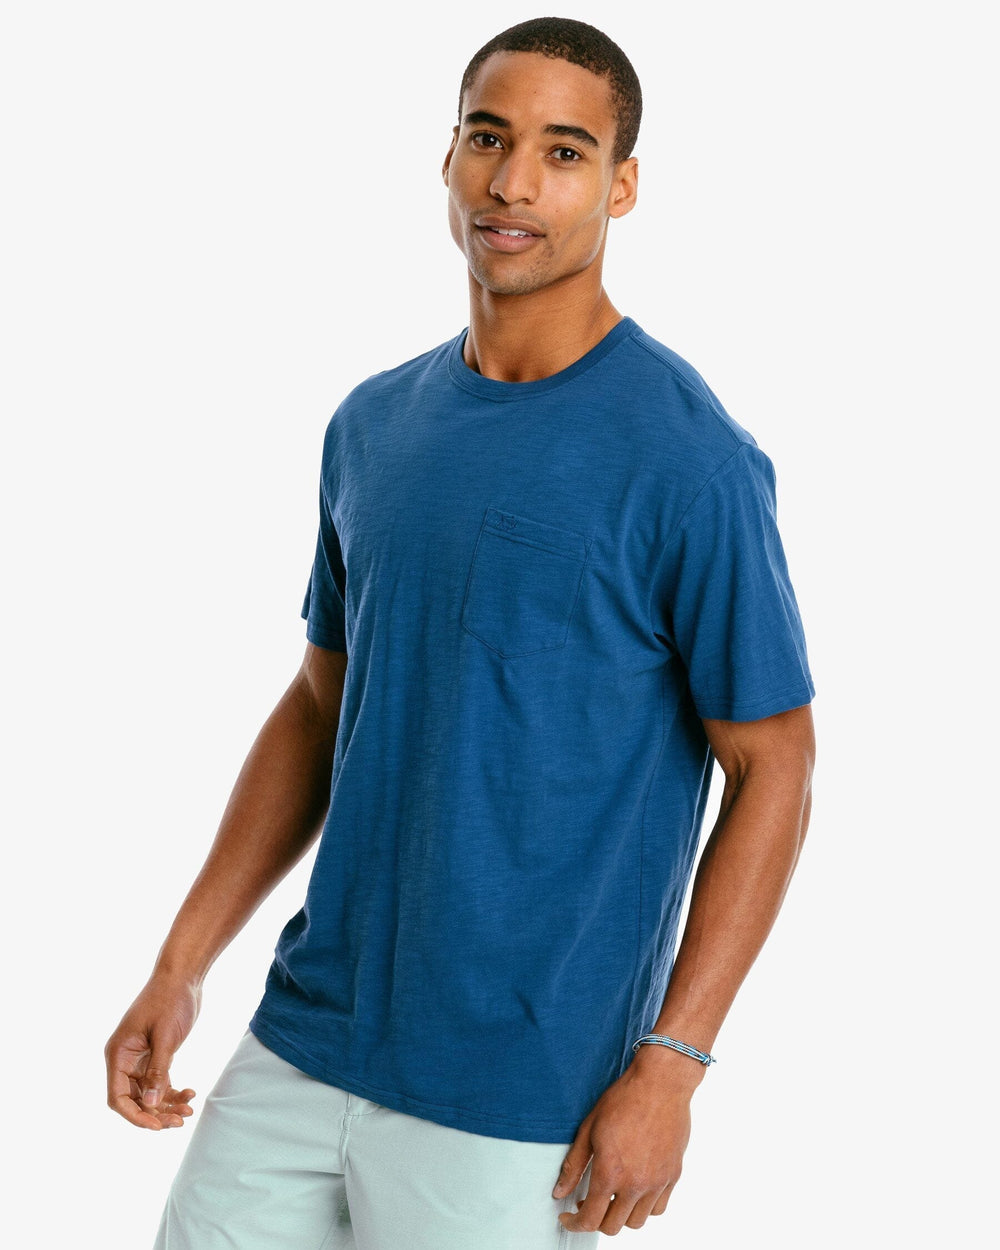 The front of the Men's Sun Farer Short Sleeve T-Shirt by Southern Tide - Dark Denim